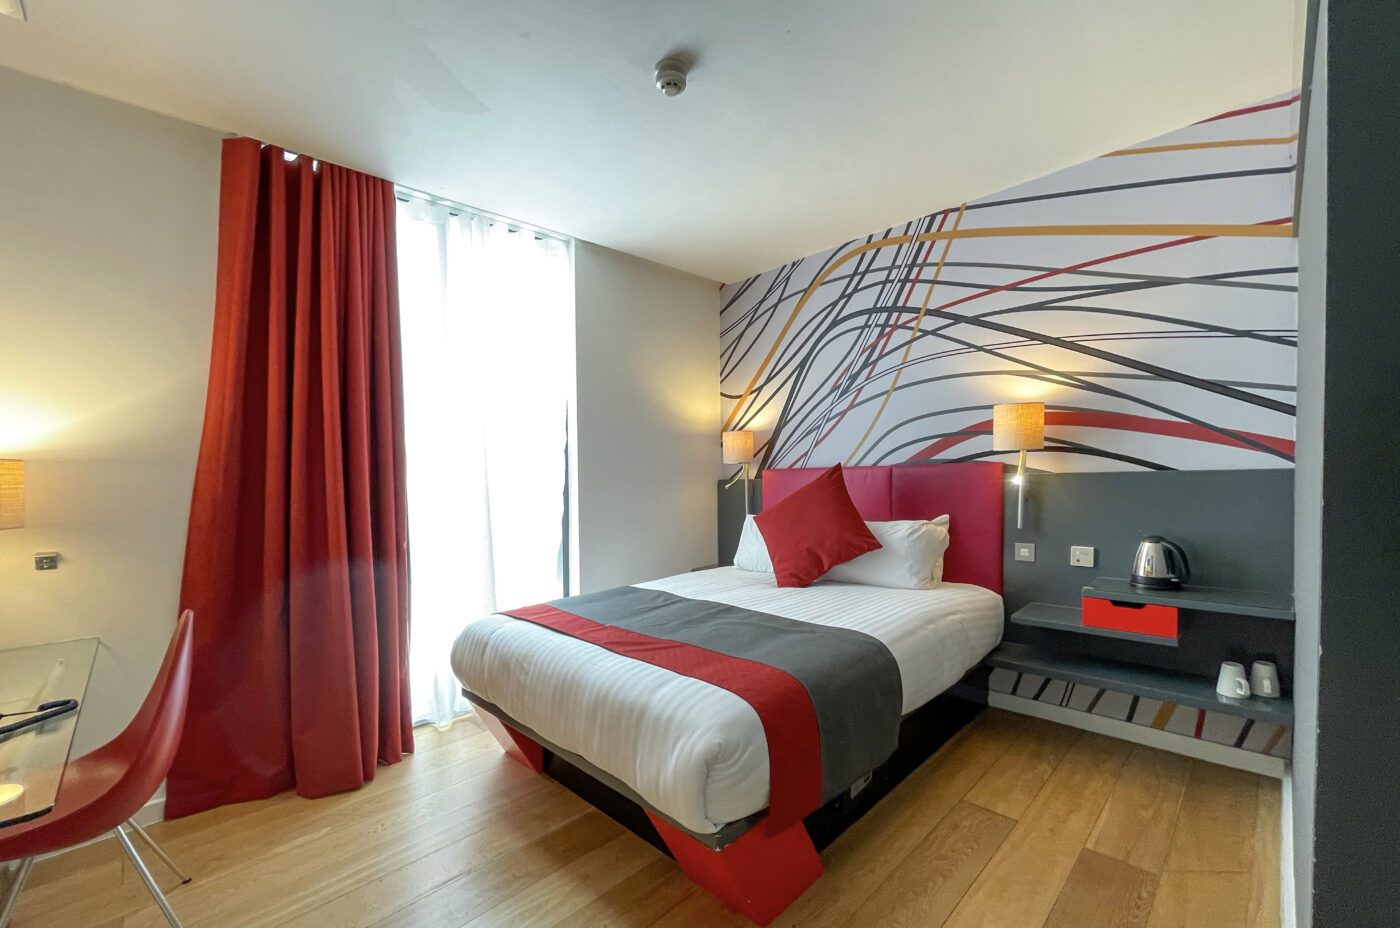 An accessible room by Sleeperz Hotel Cardiff, furnished with a double bed and an accessible bedside table.